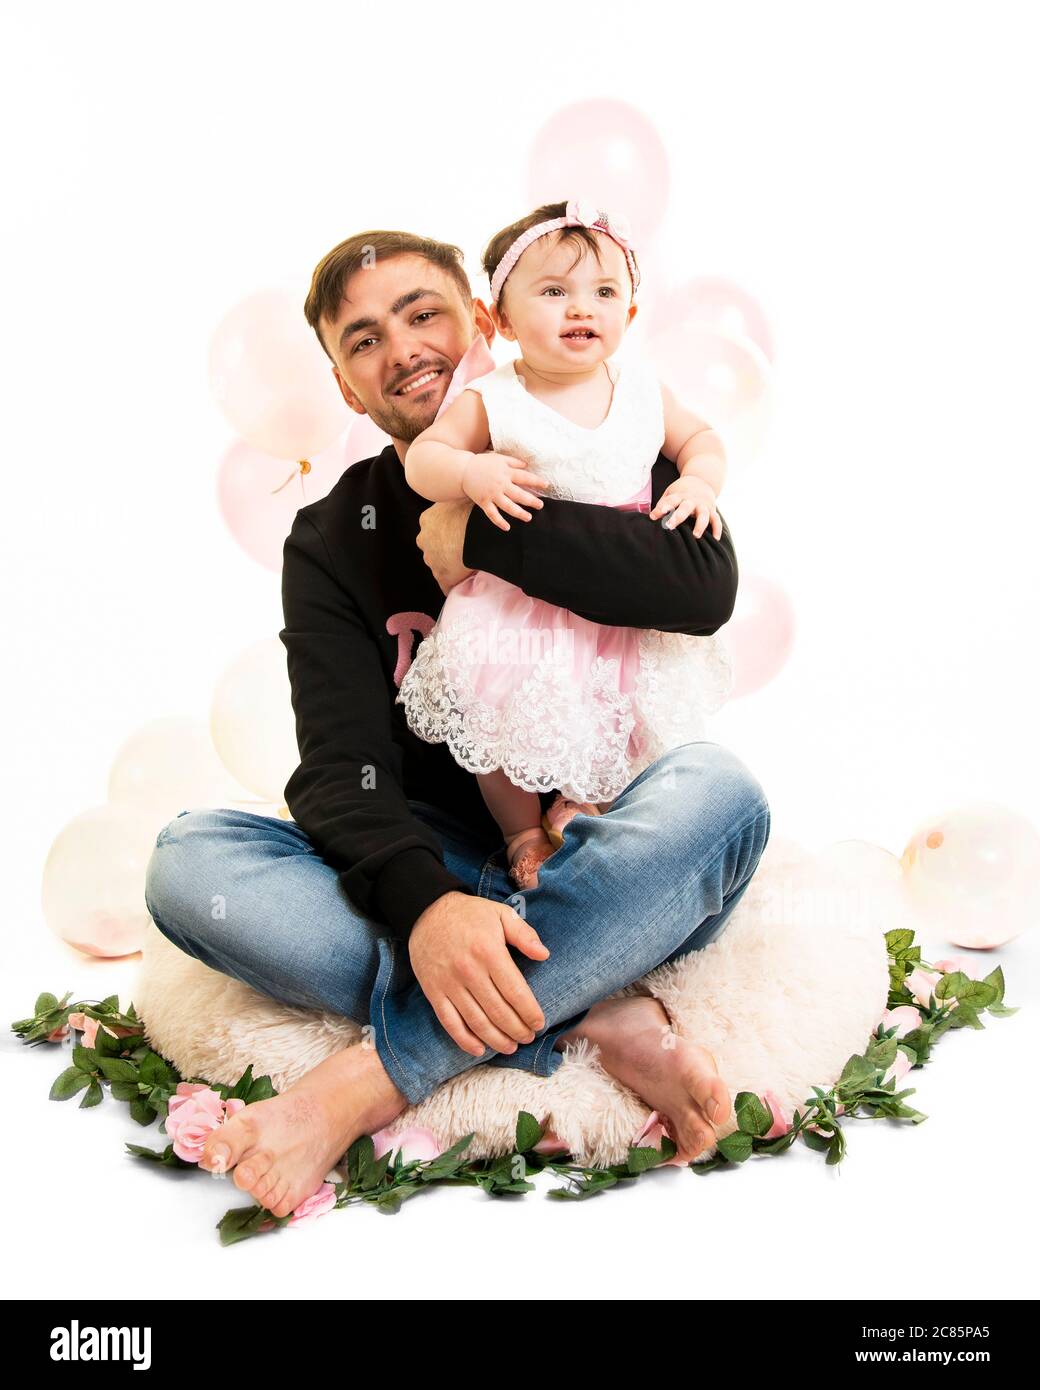 Vertical lifestyle portrait of a young dad with his baby daughter on her first birthday. Stock Photo